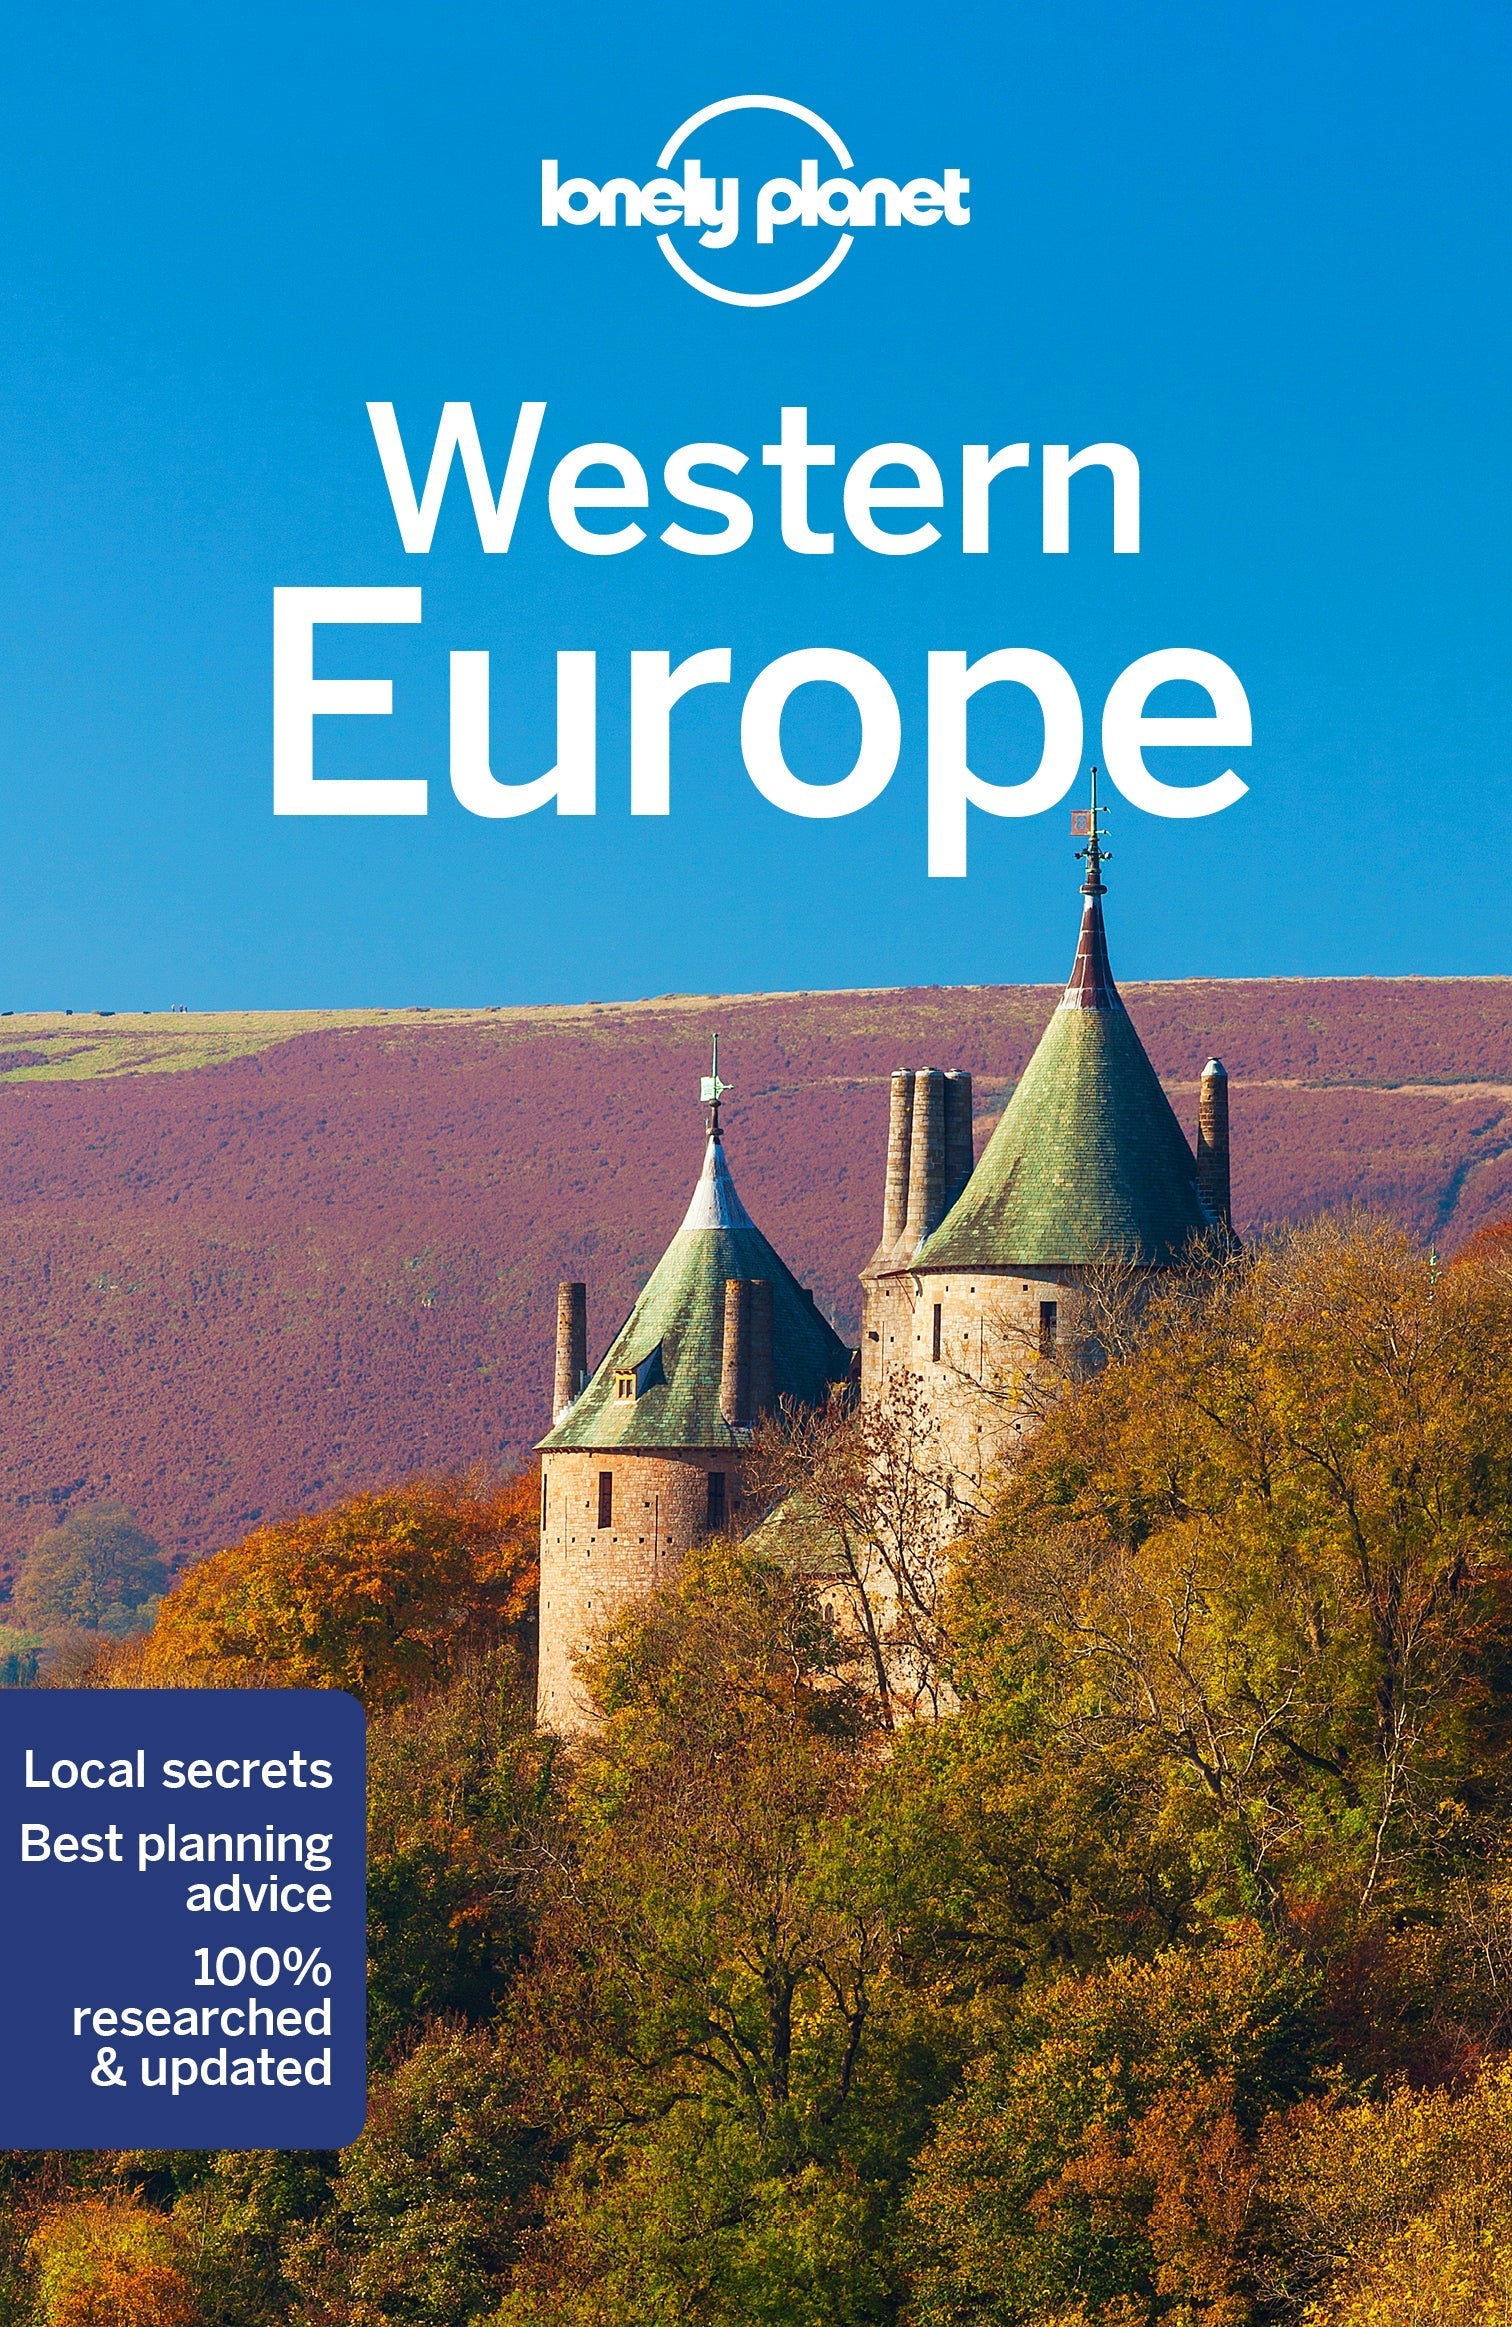 and　Europe　Western　Book　Travel　Ebook